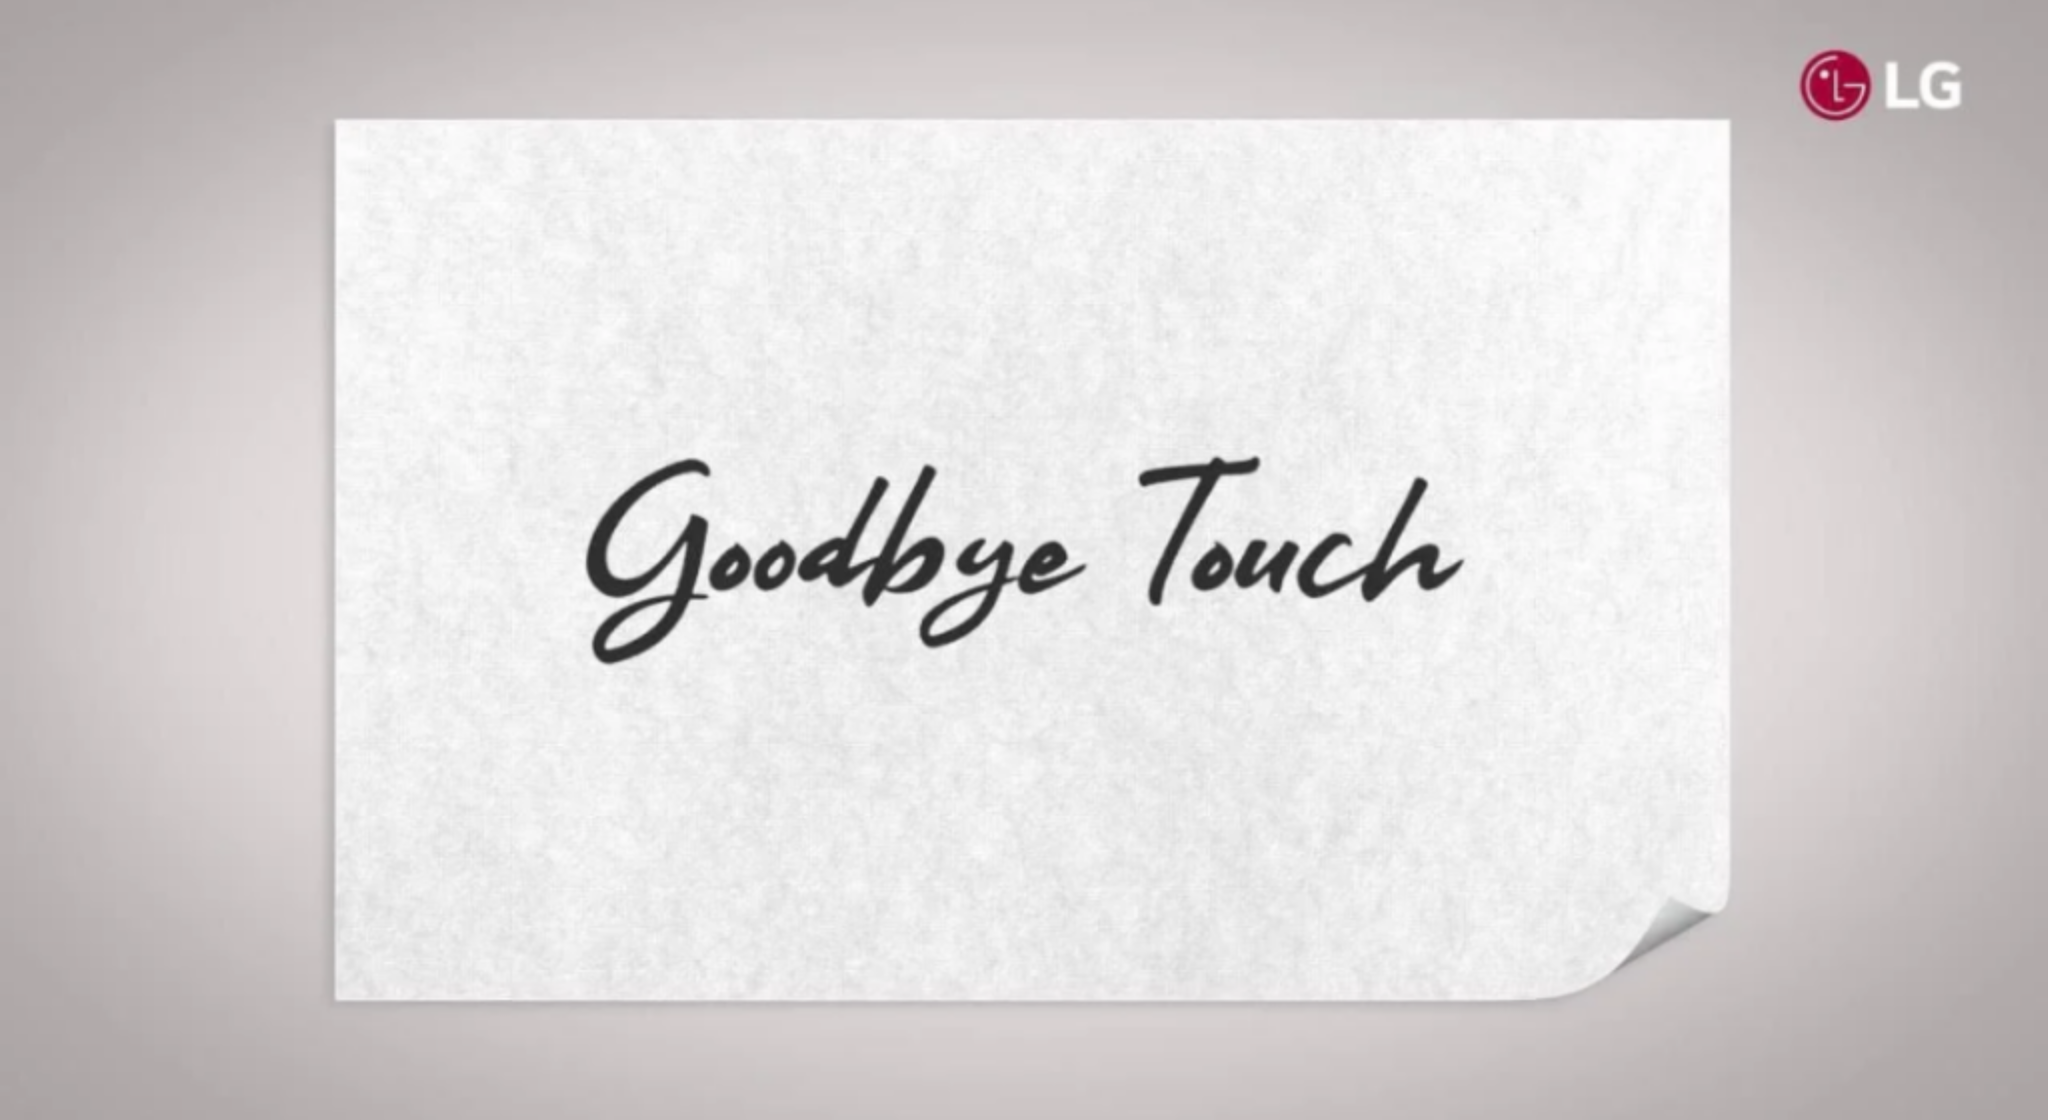 LG Says Goodbye Touch 